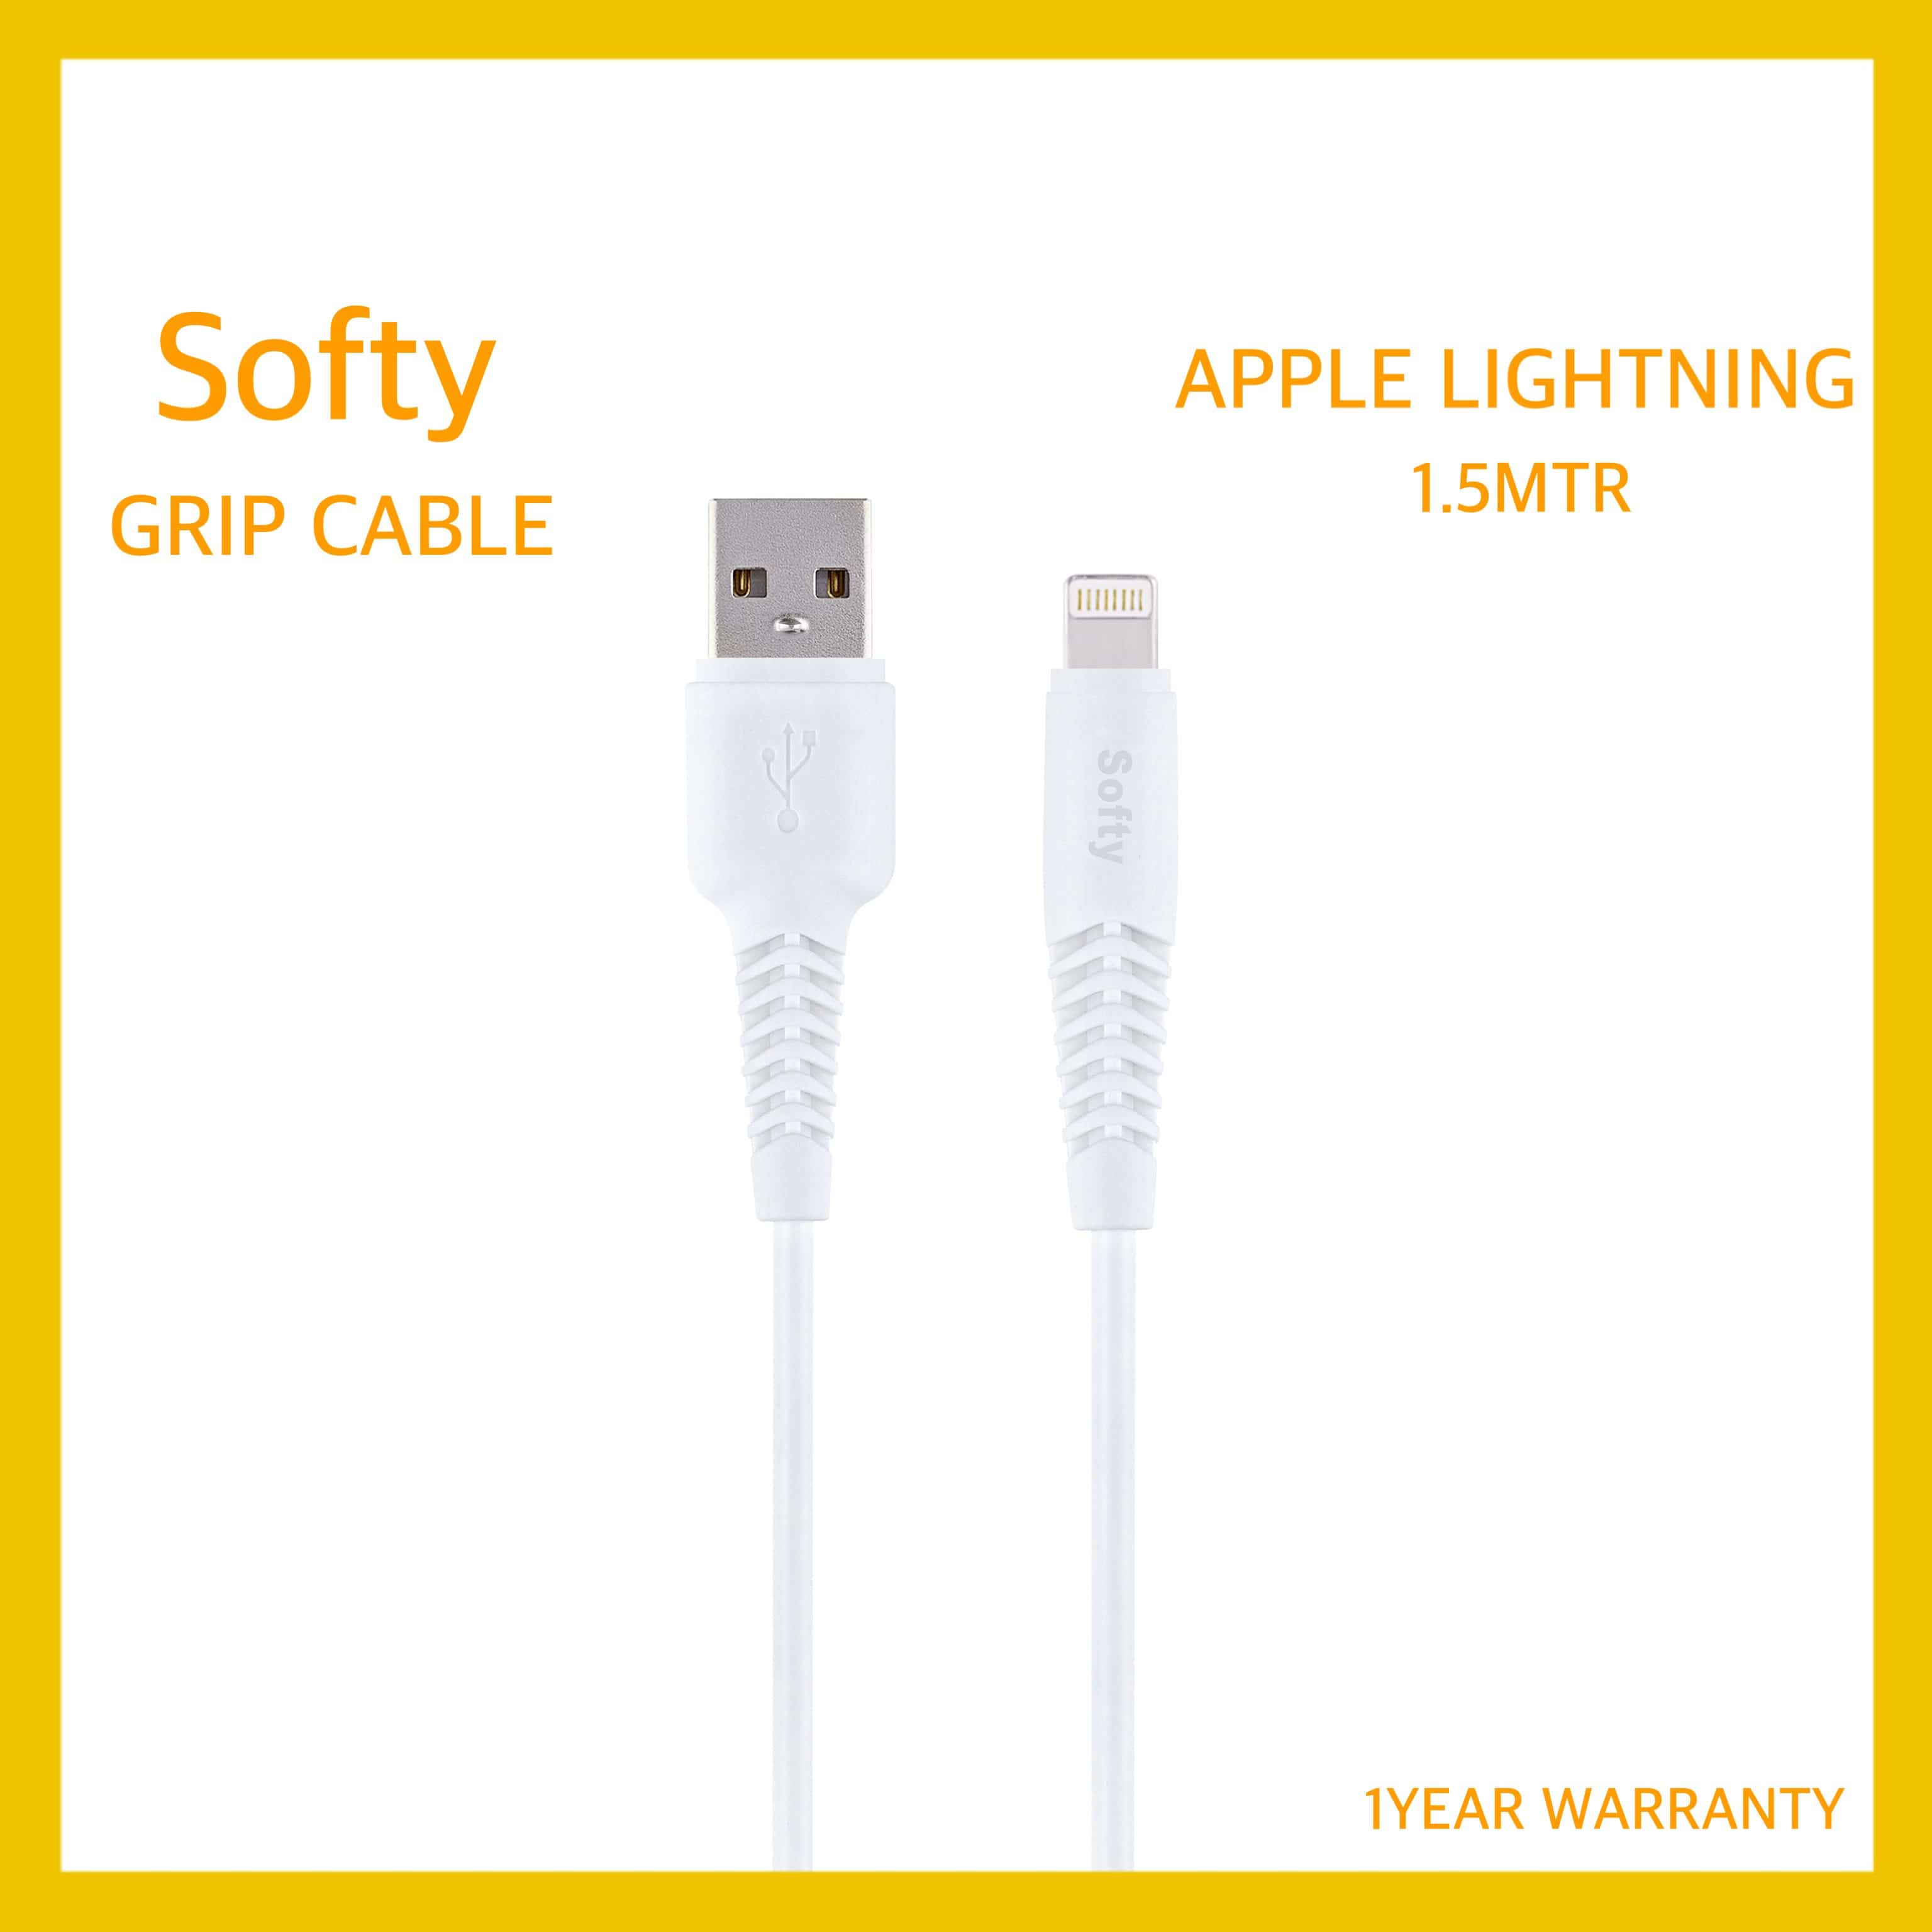 Softy premium quality for apple Lightning usb grip cable 1.5M-USB Cable-dealsplant